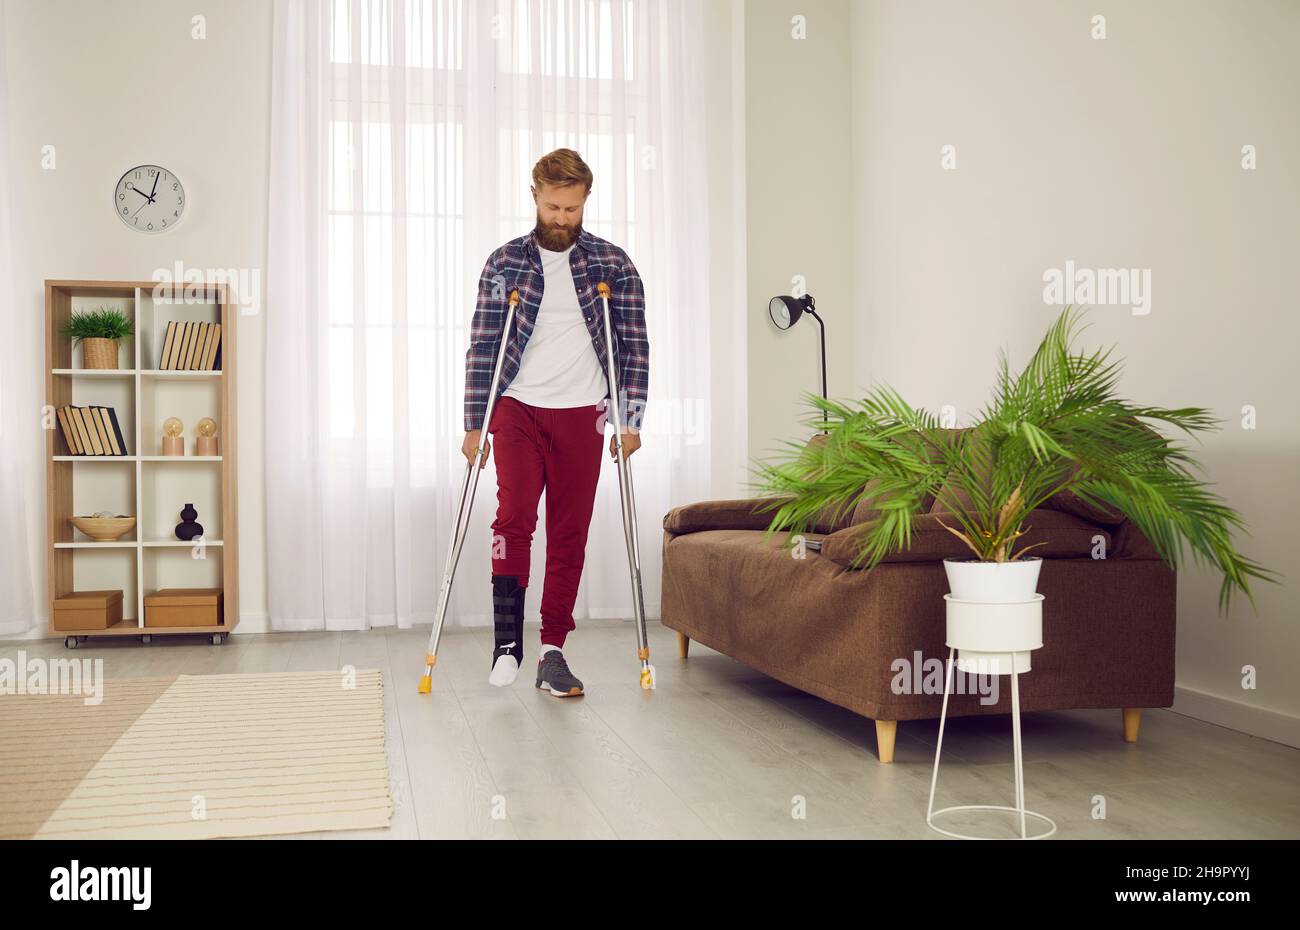 Young man with broken foot or leg wearing support brace and walking with crutches at home Stock Photo